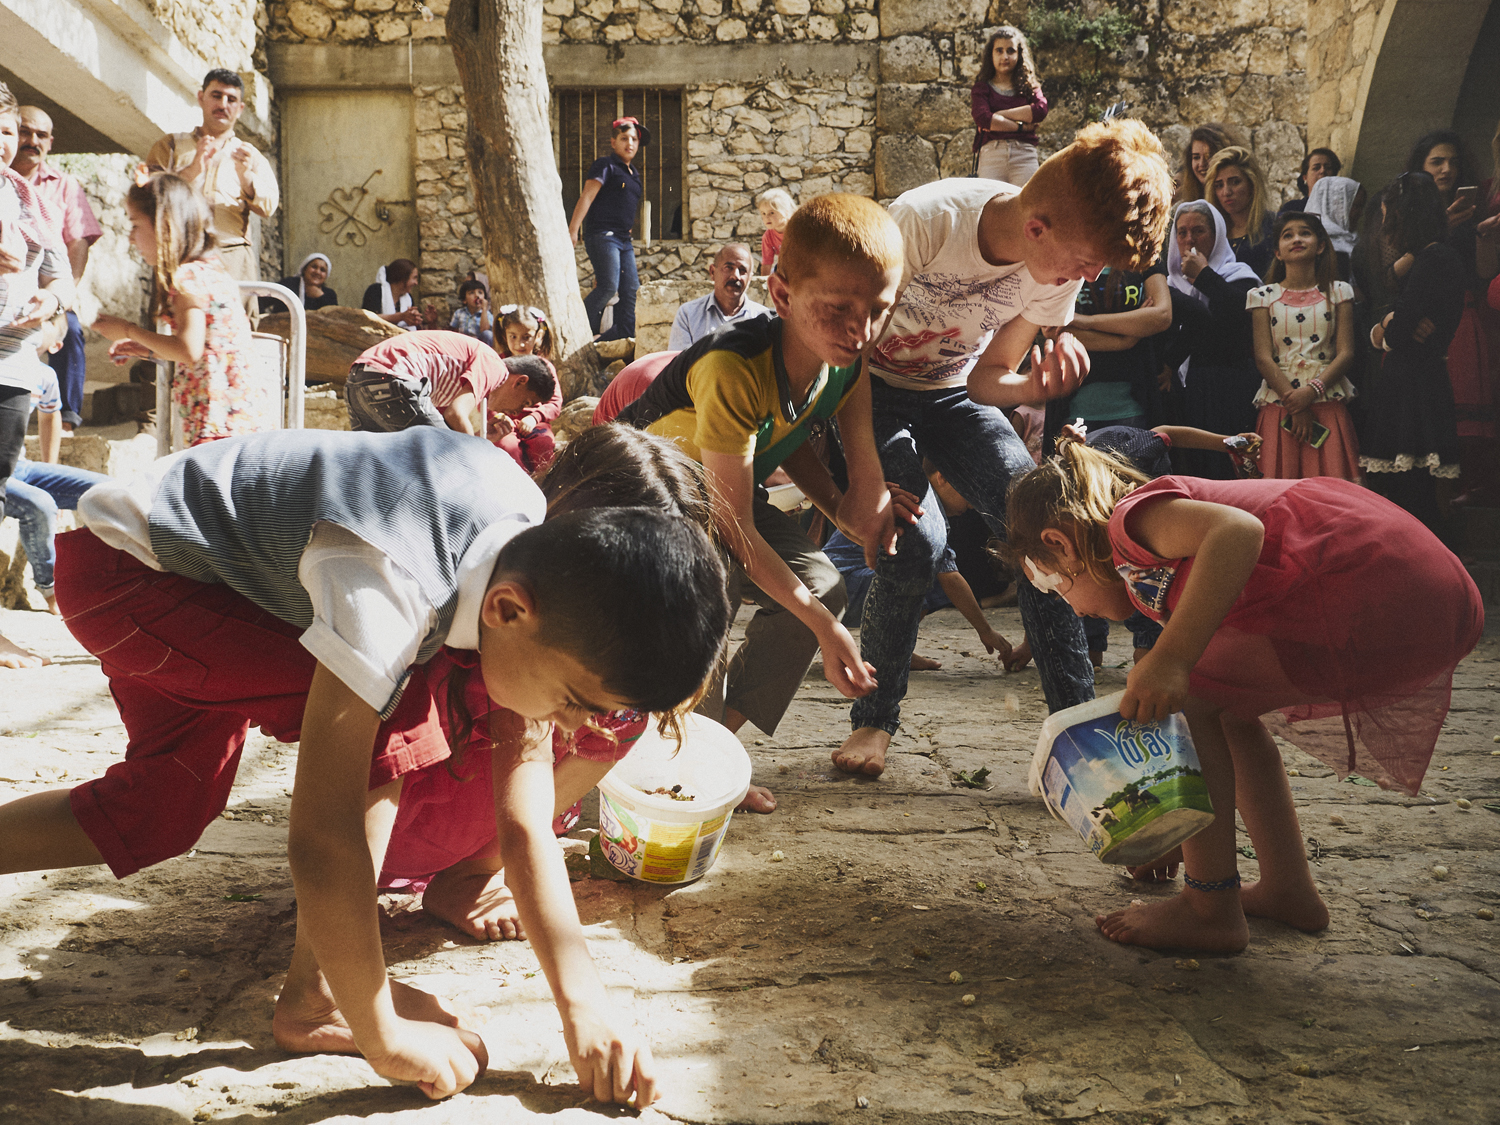 Lalish, Northern Iraq. In the years since the Yazidi genocide, visitors to this courtyarded complex have increased tenfold as families make the pilgrimage across Kurdistan. Children pick mulberries from the floor as their parents form queues to perform ancient rituals and respect their religion.